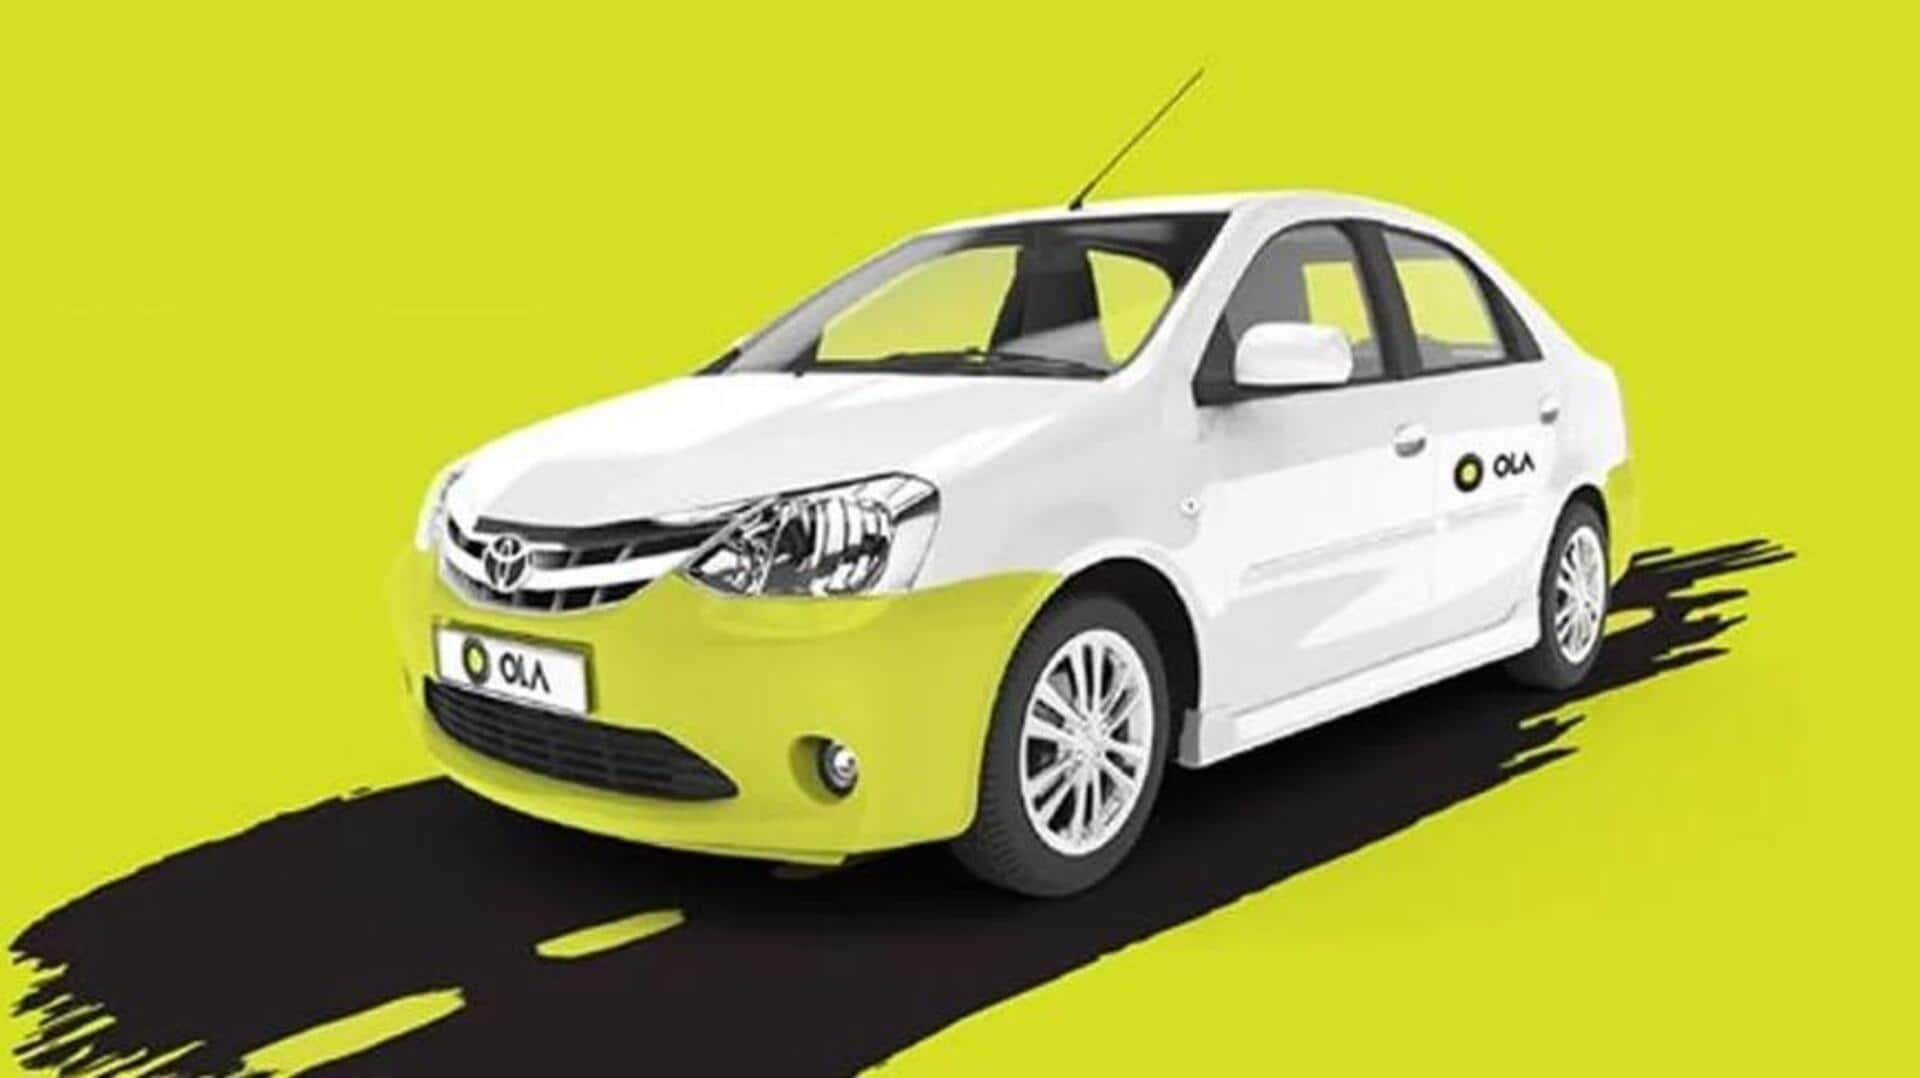 Ola introduces UPI payments for cab rides: How it'll work